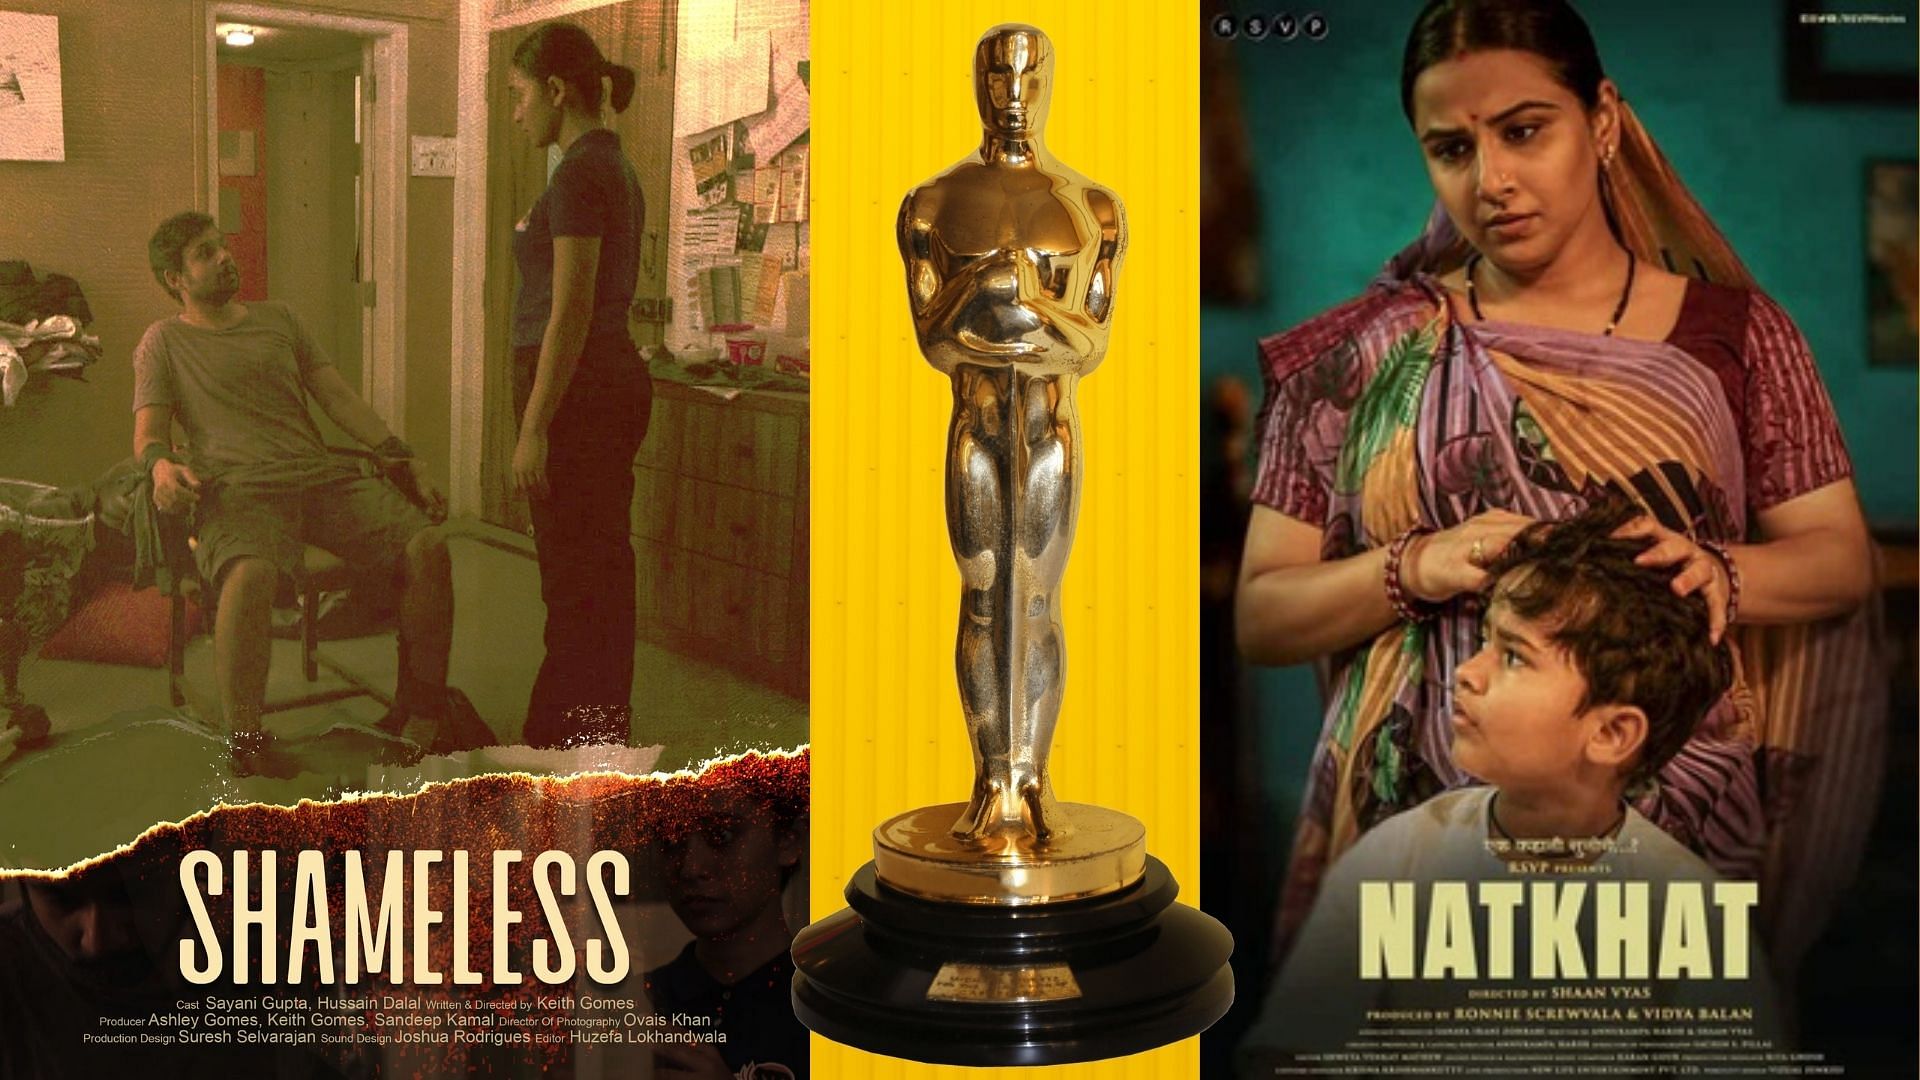 There is no federation that selects a short film as India’s official entry to the Oscars.